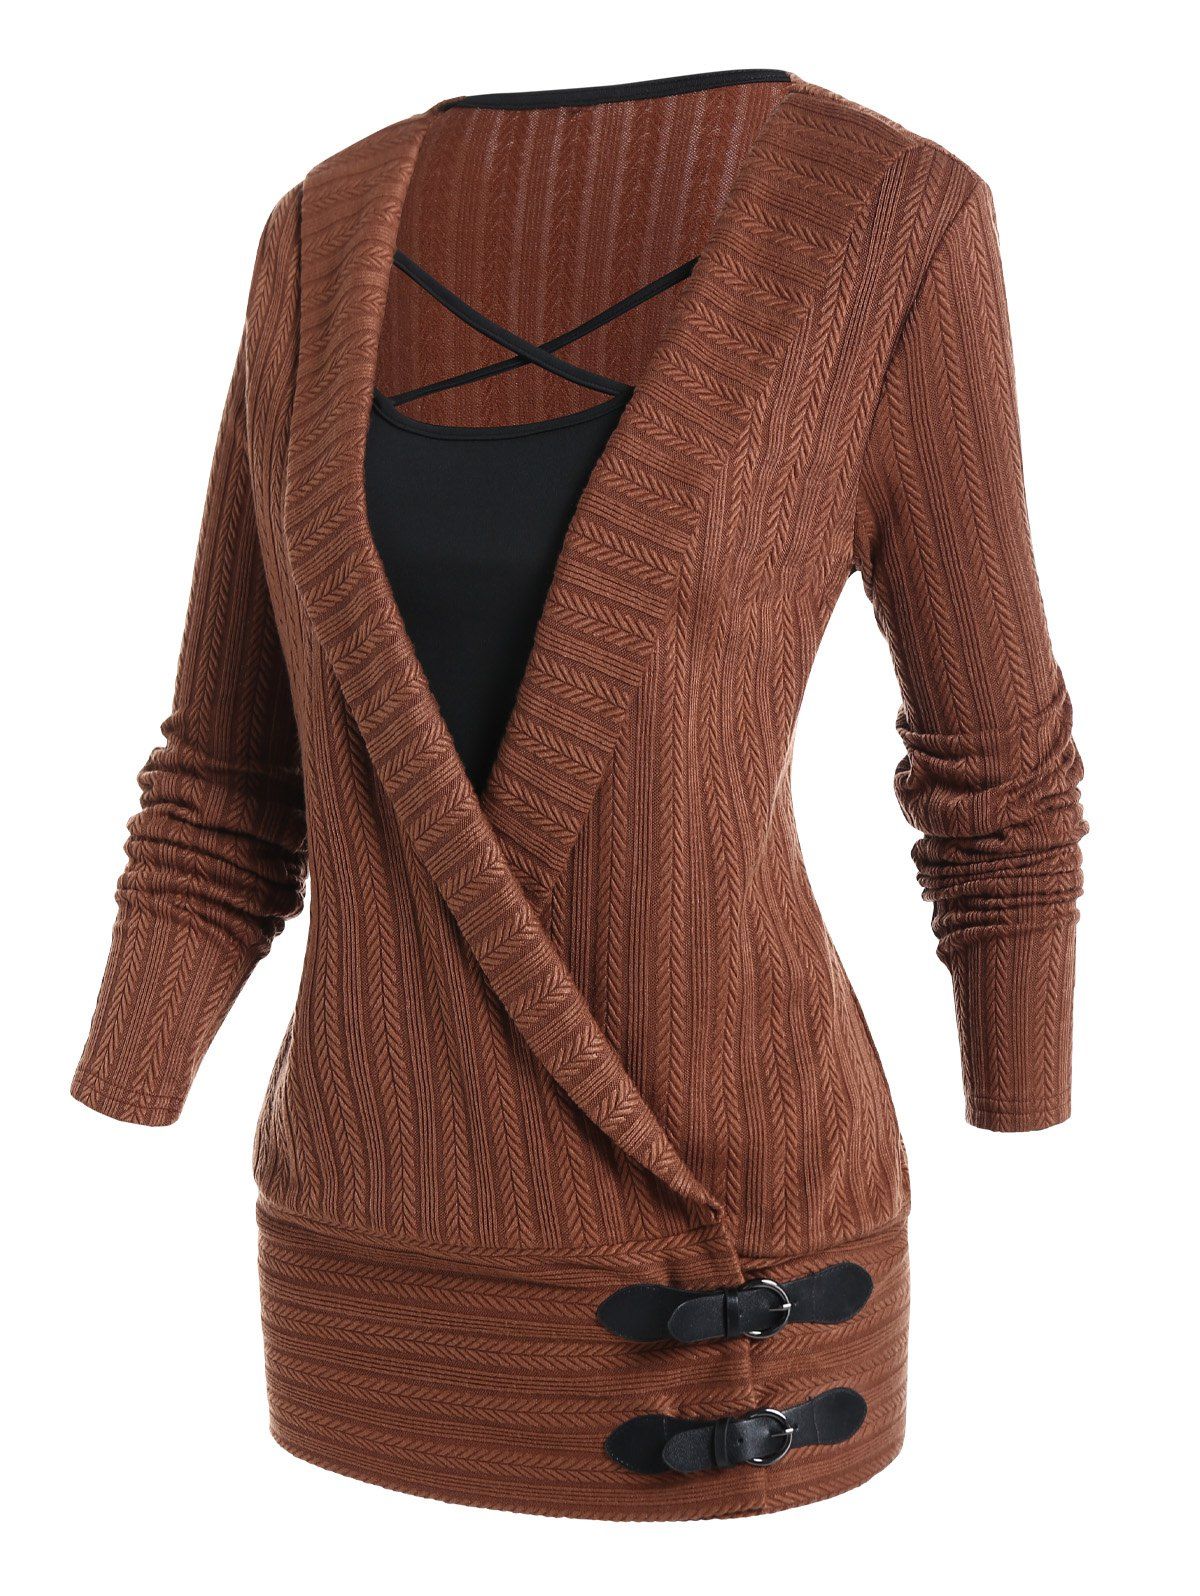 Stripe Leaf Textured Knit Faux Twinset Top Crisscross Buckles Surplice Long Sleeve Knitted 2 In 1 Top - COFFEE M